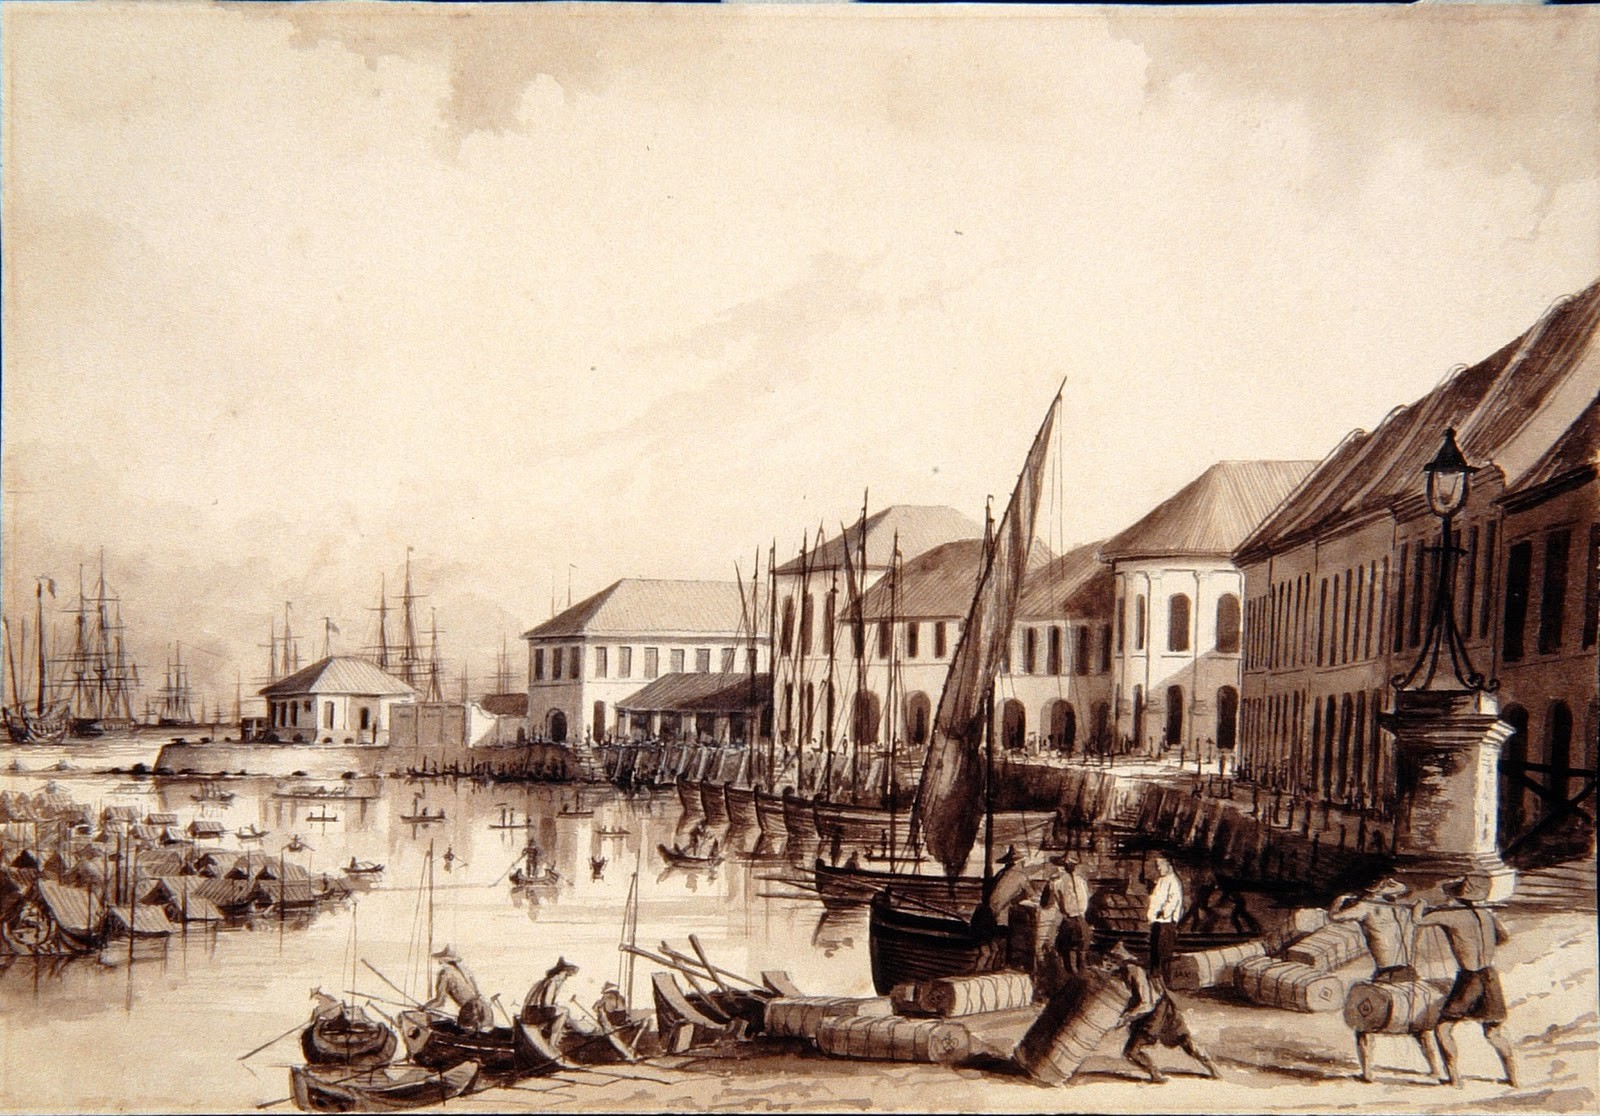 A watercolour and ink impression of Singapore by Charles Dyce. The River from Monkey Bridge was painted between 1842 and 1843. It shows a bridge now known as Elgin Bridge.